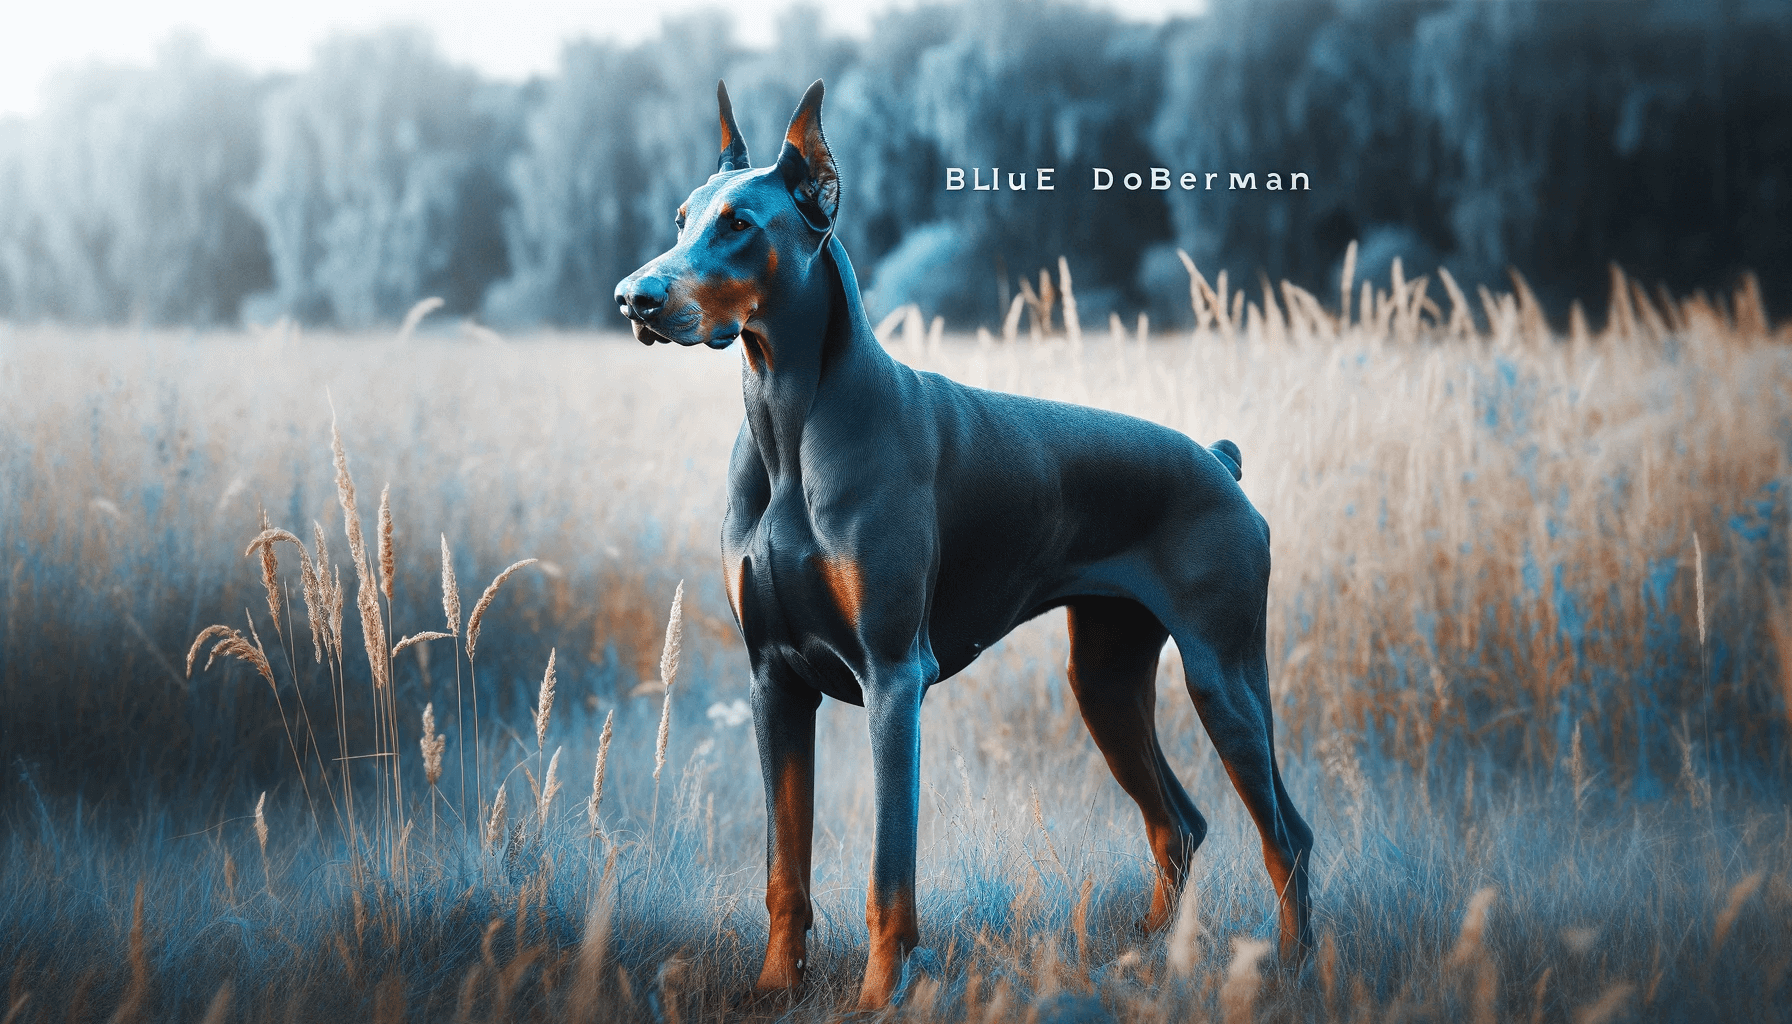 A Blue Doberman standing in a field with the text overlay 'Blue Doberman,' highlighting the unique steel-blue color of its coat.